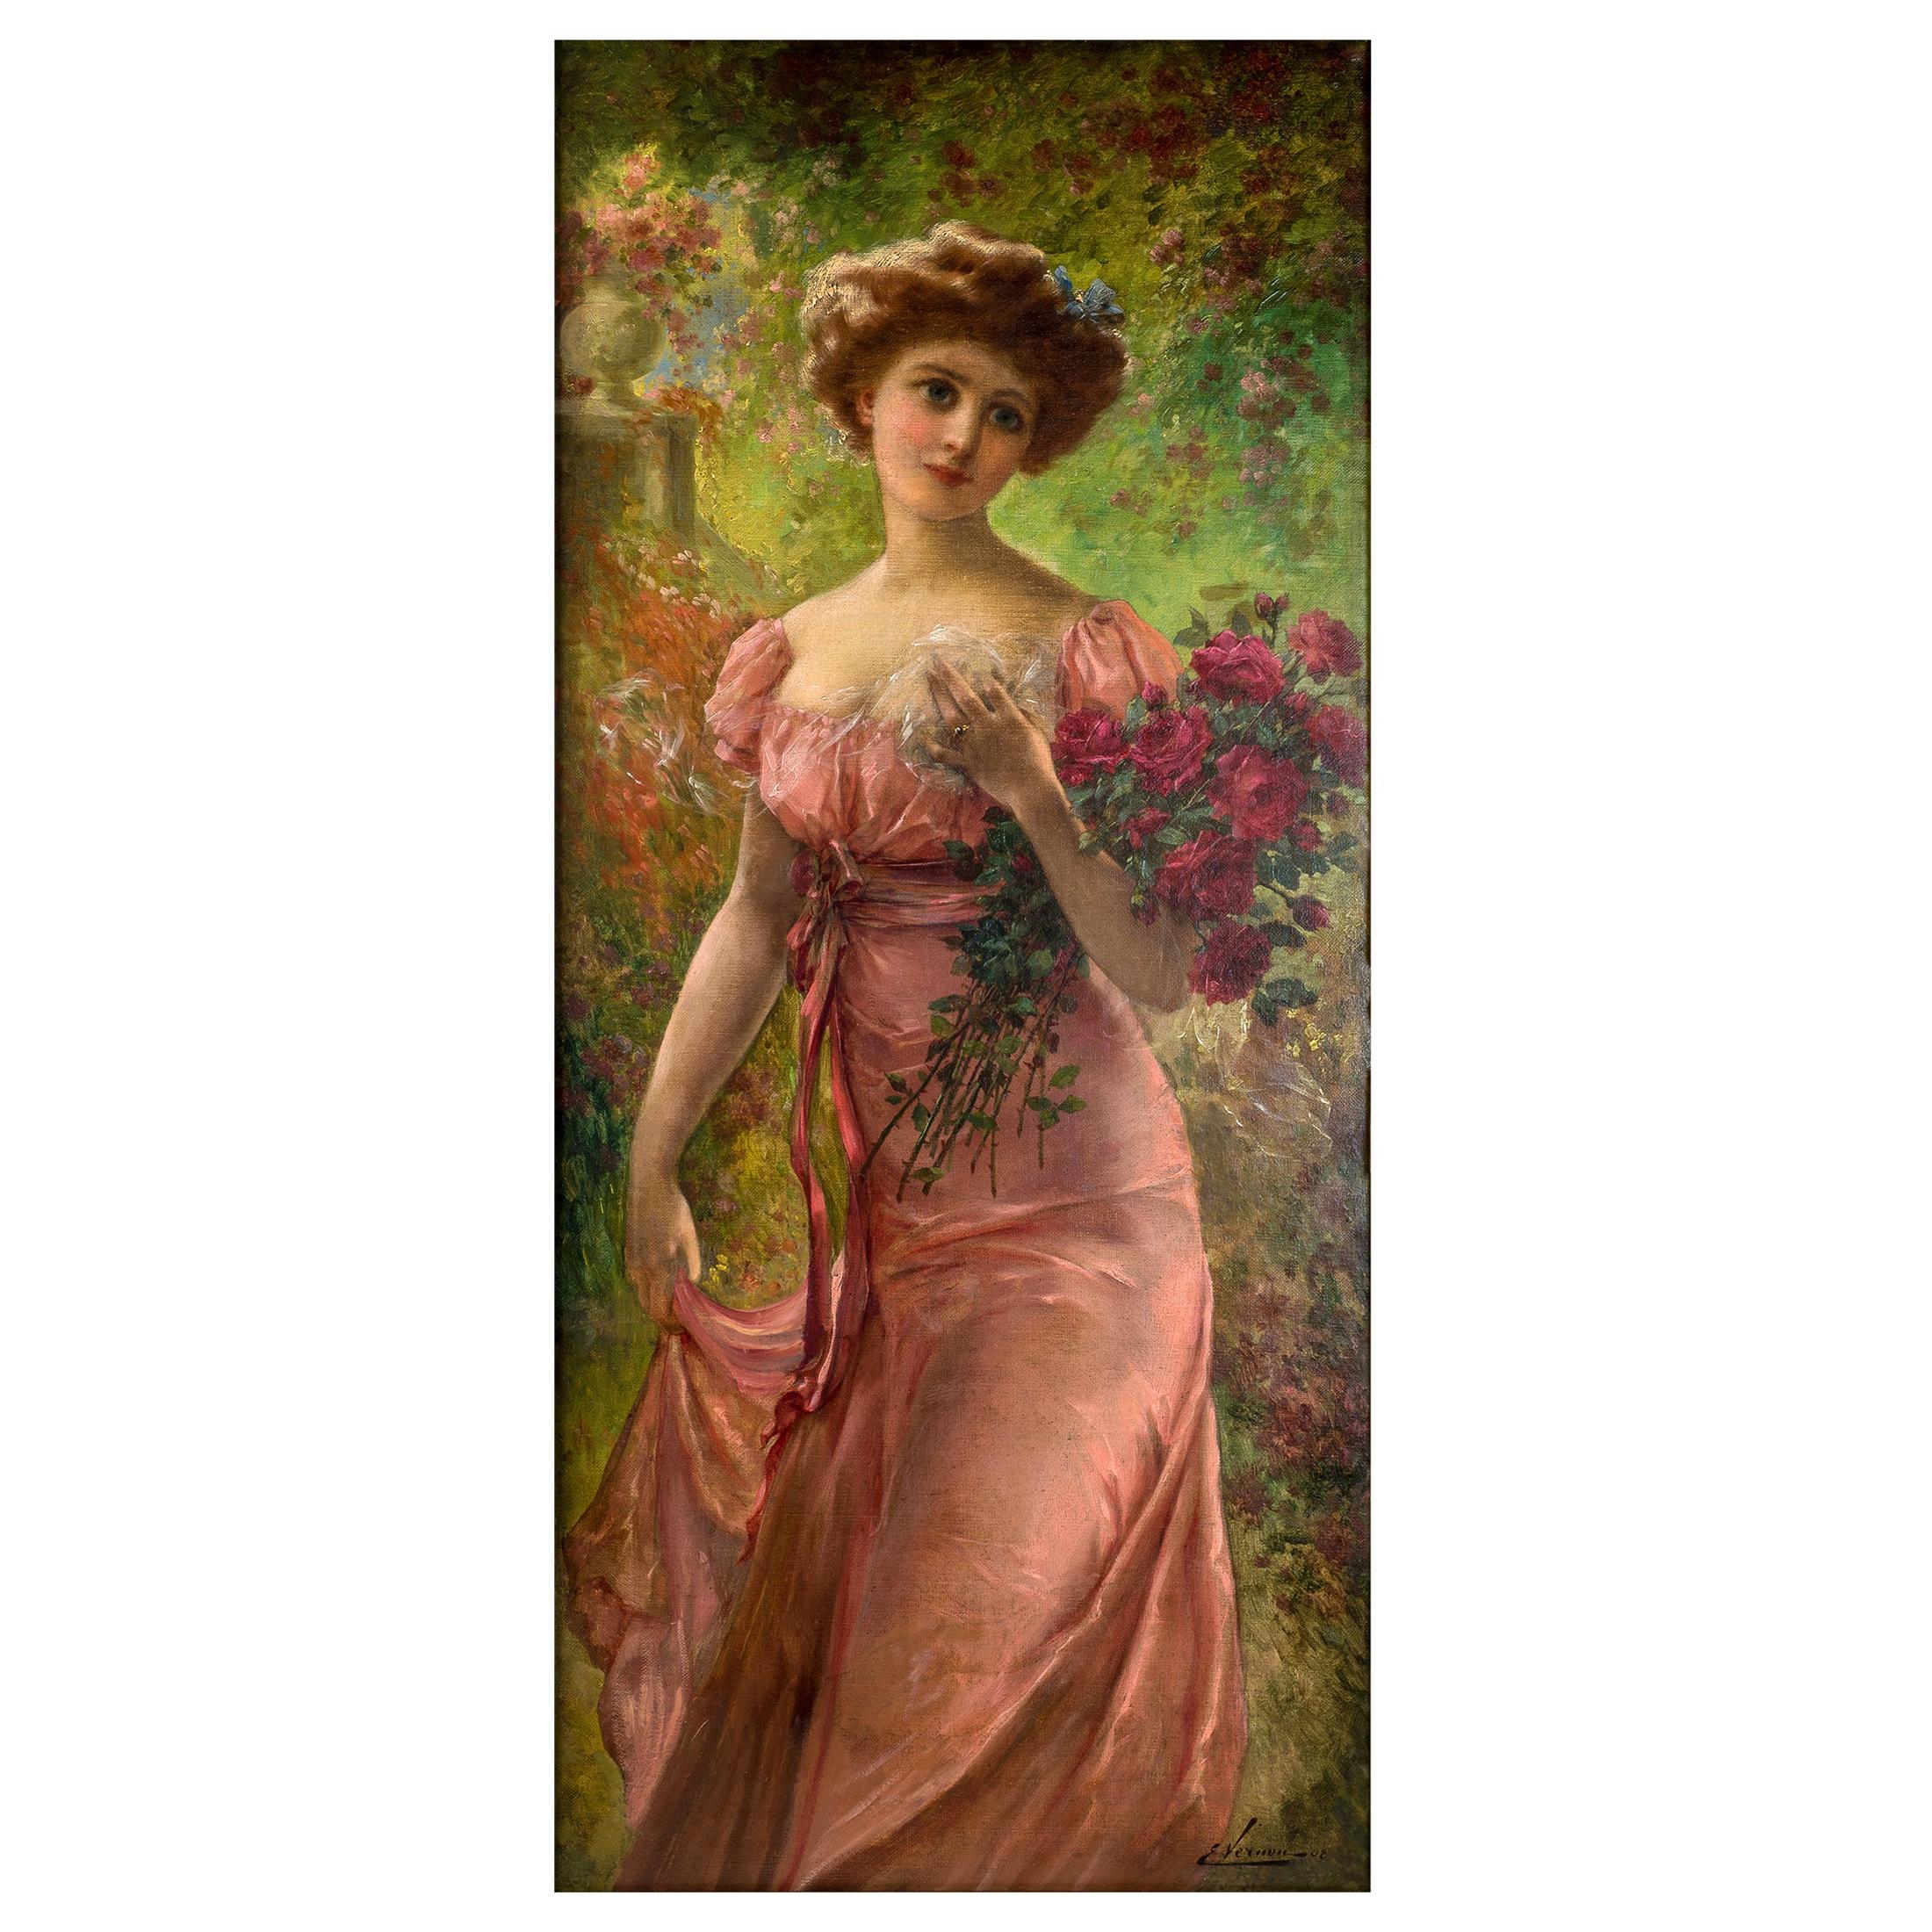 Fine Portrait of a Young Beauty Holding a Bouquet of Roses by Emile Vernon